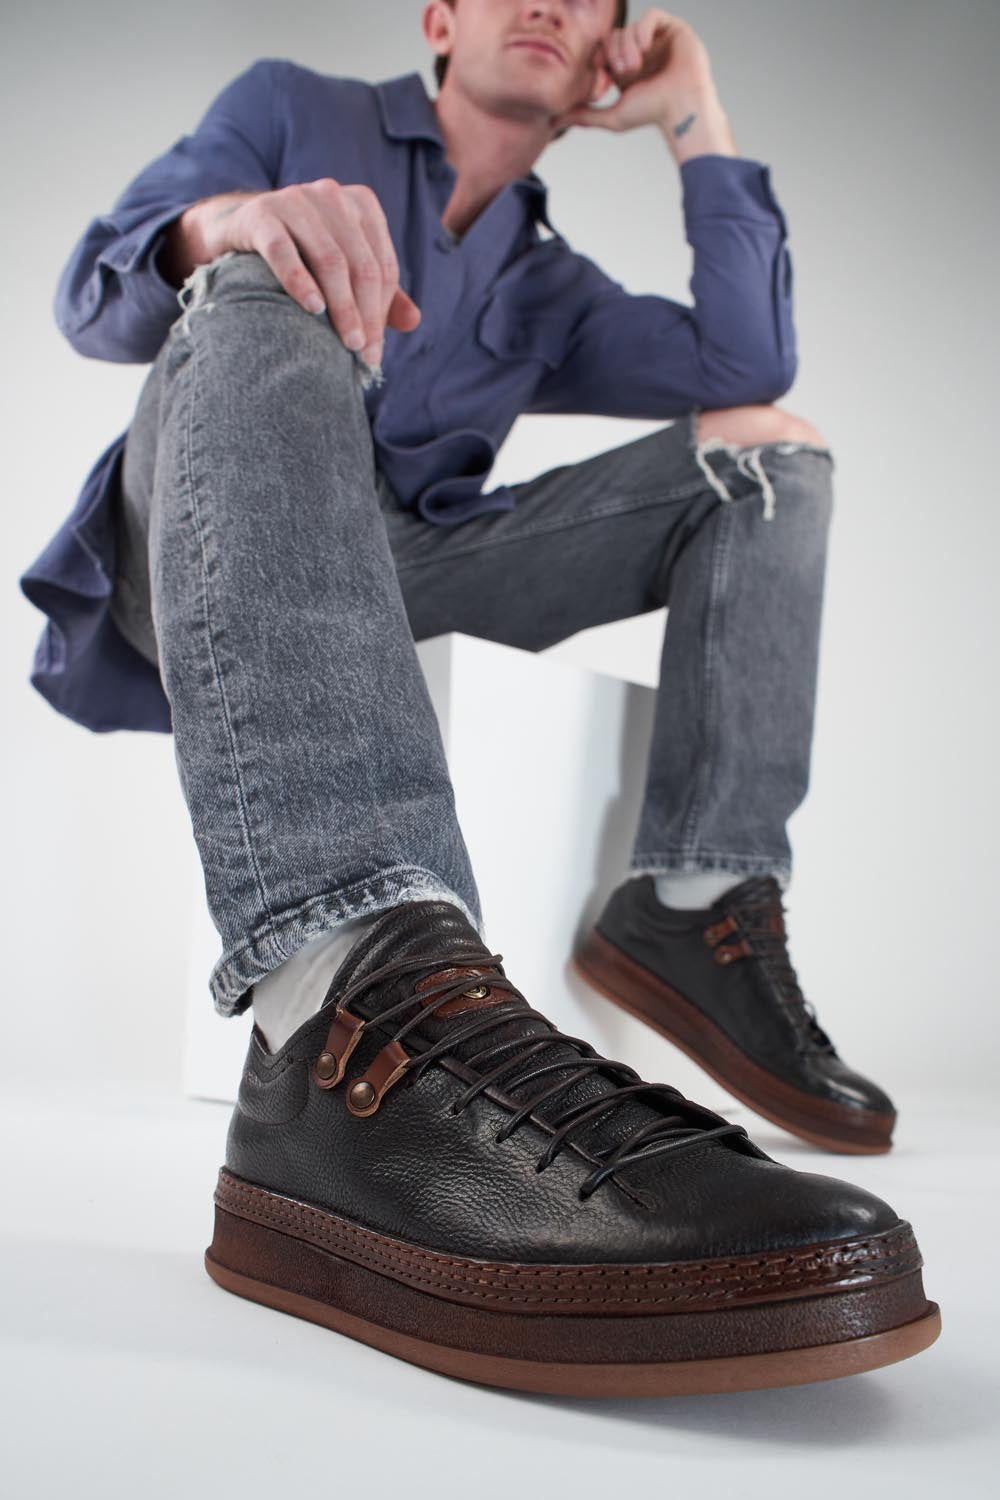 COLE dark-cocoa welted distressed sneakers.